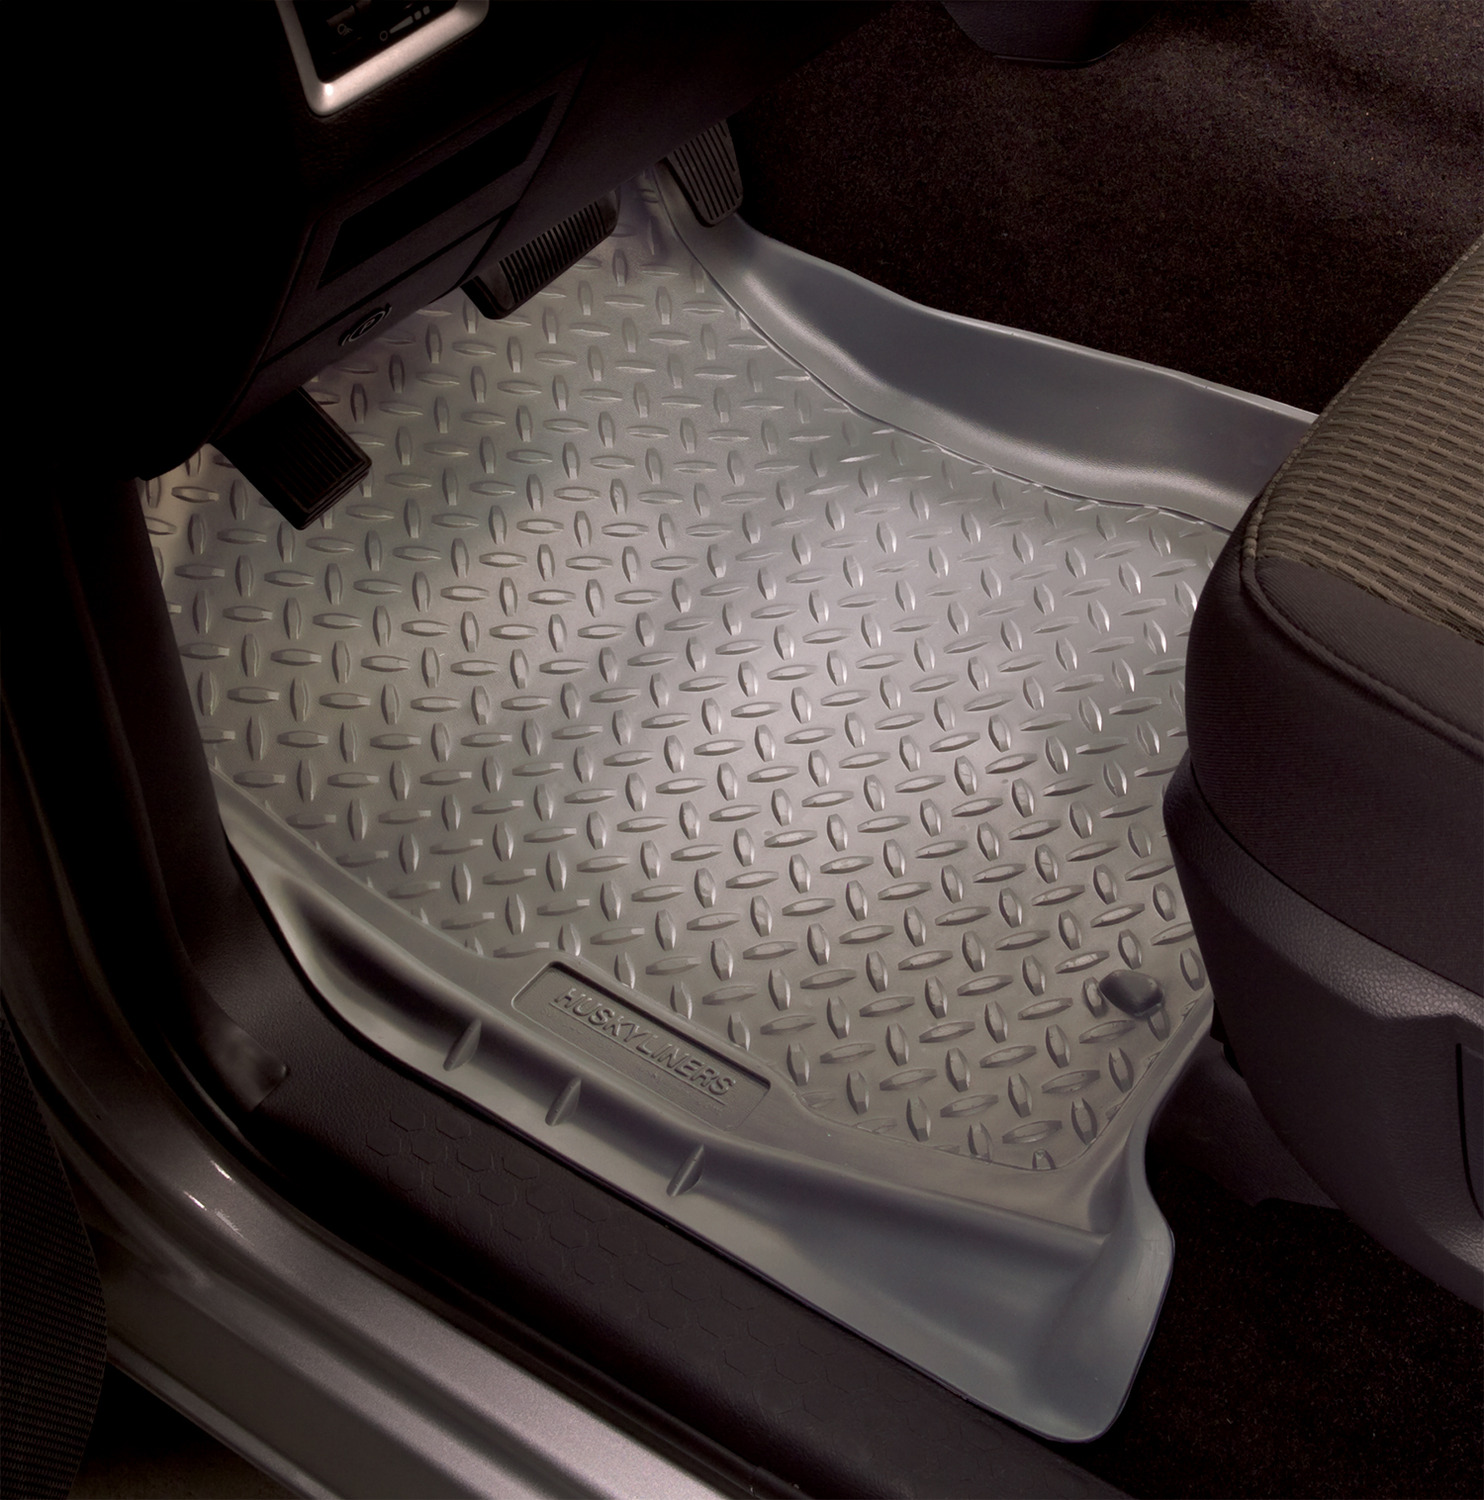 ford excursion 2004 floor liners